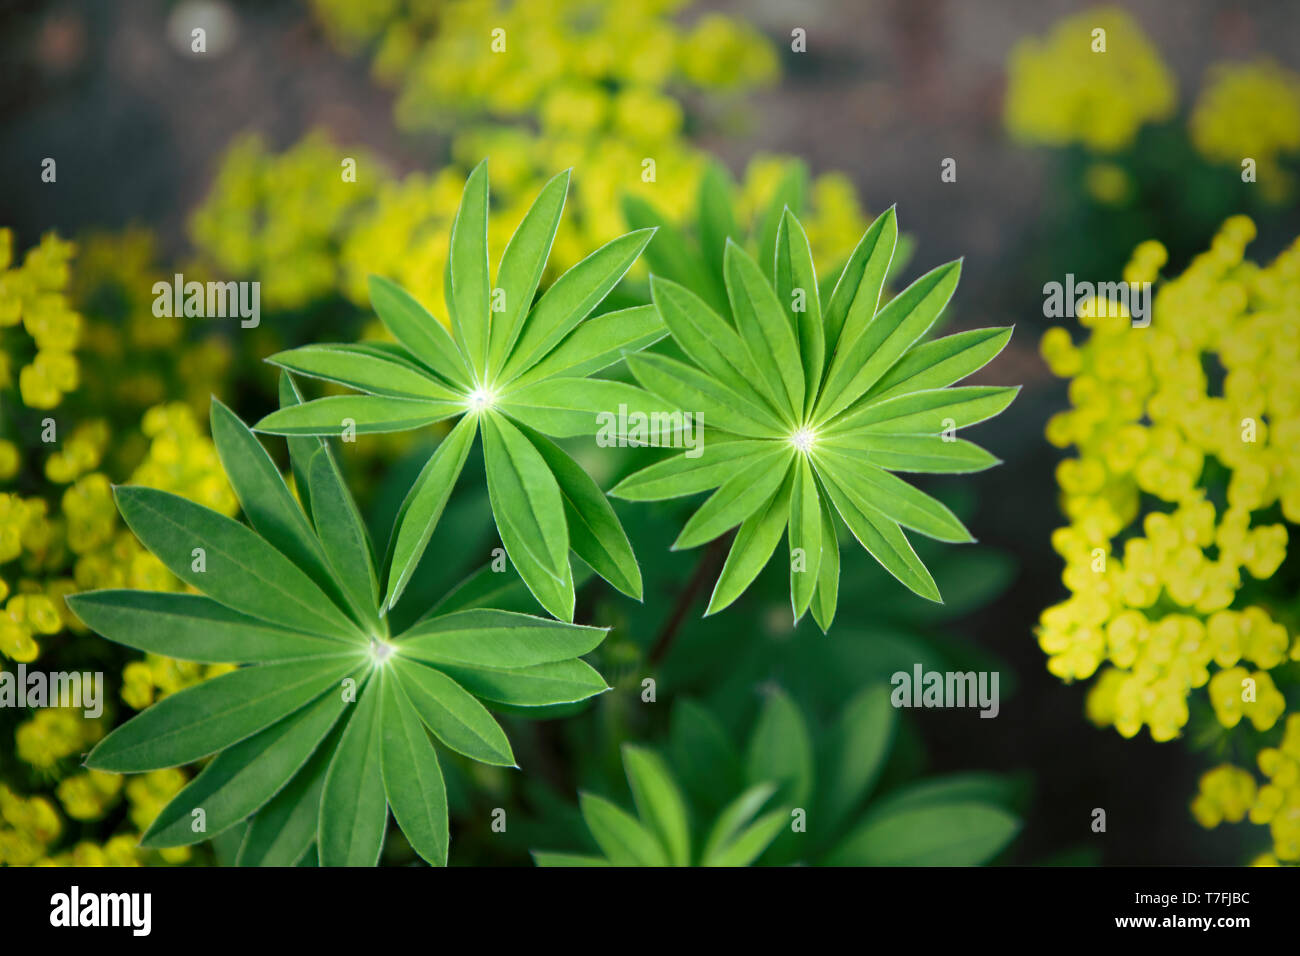 Three rosette shape leaves and yellow tiny flowers. Composition of plants in the garden. Vegetative background theme. Shades of green. Stock Photo